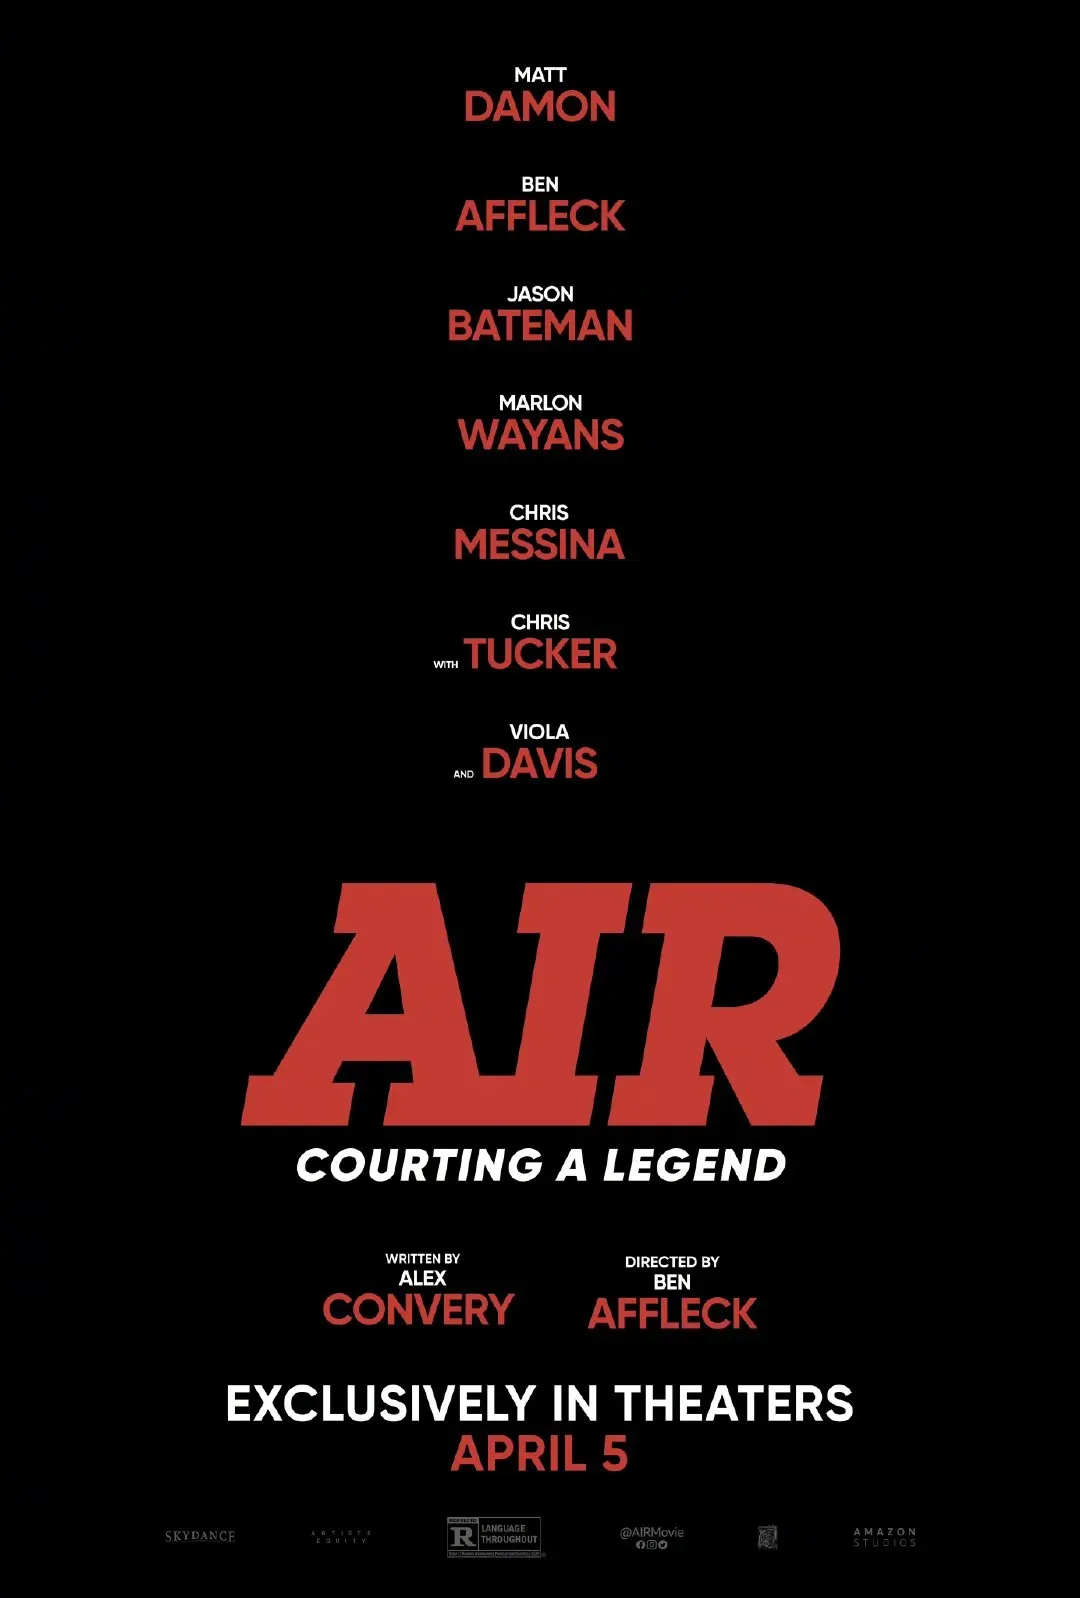 Ben Affleck and Matt Damon's new film 'AIR' releases official trailer and poster | FMV6